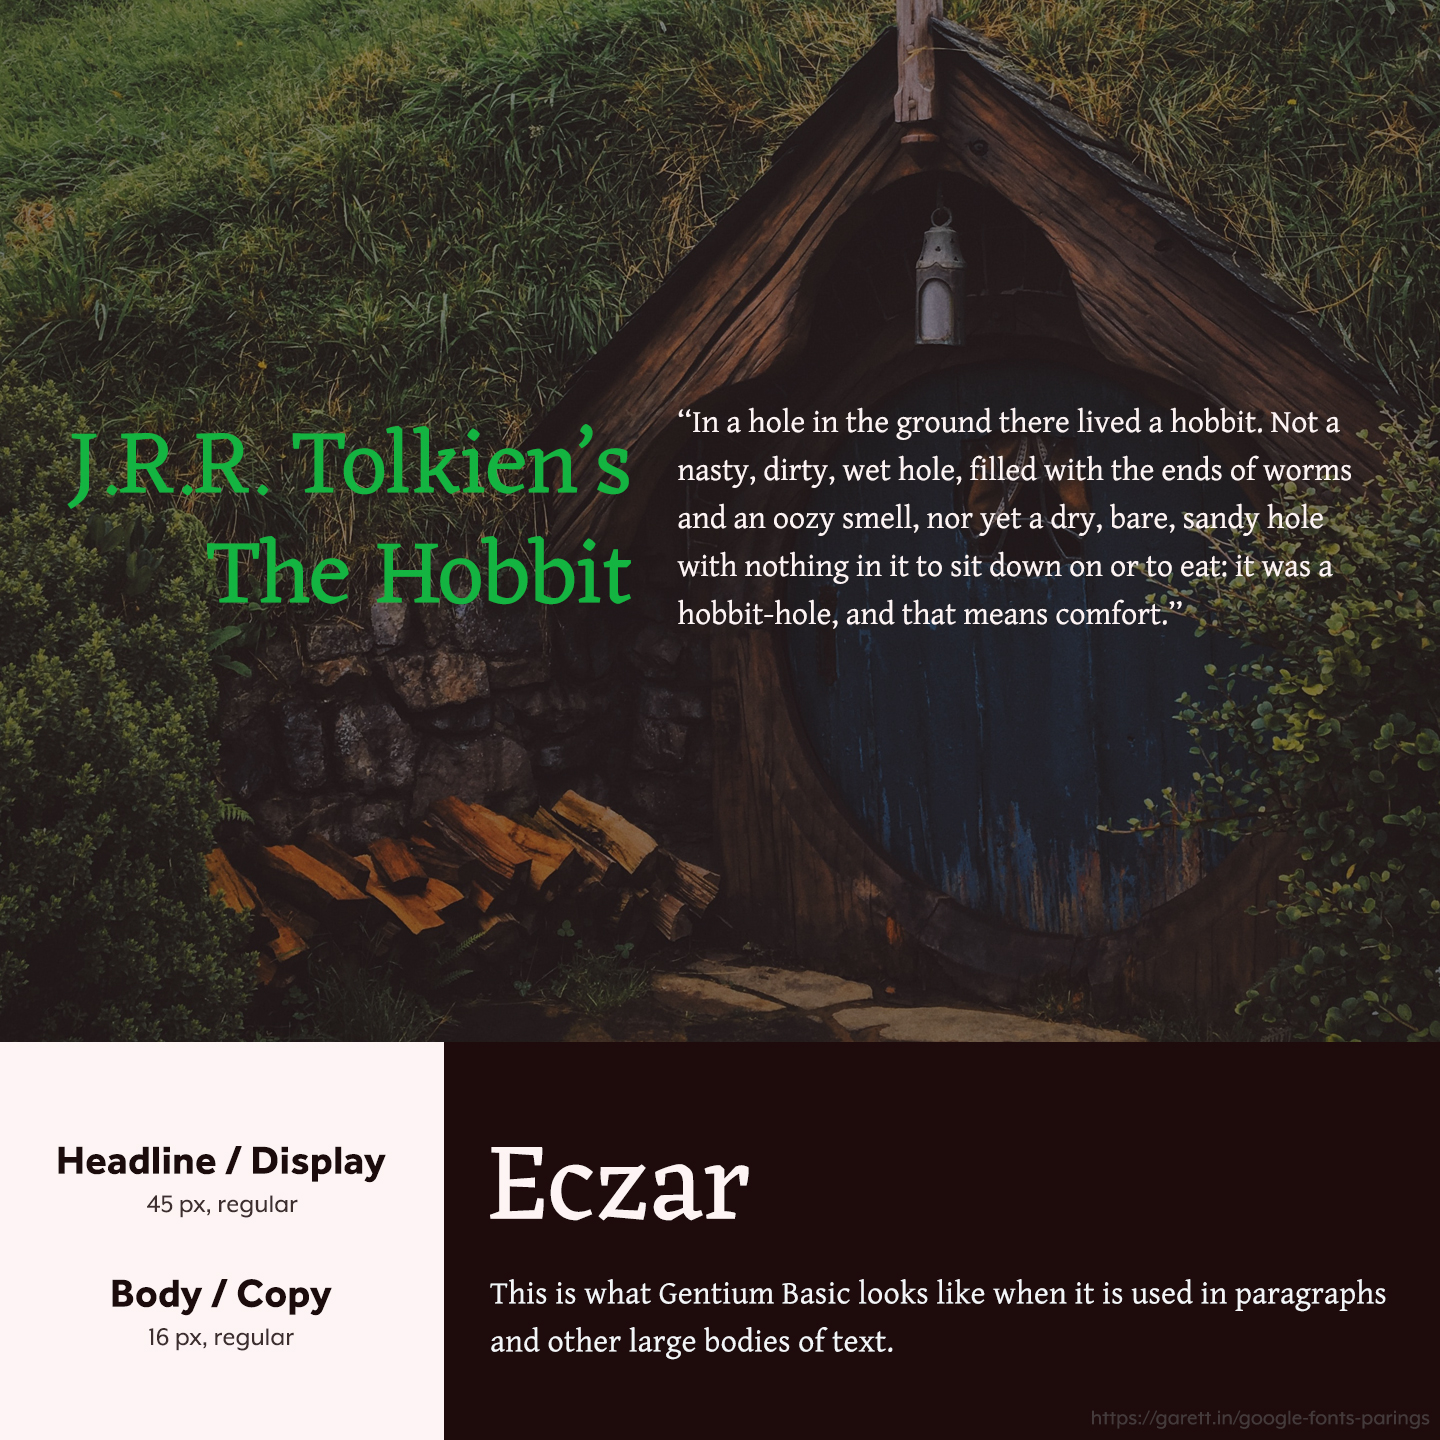 Eczar and Gentium Basic font pairing - 30 Google Font Pairings for Your Brand and Website